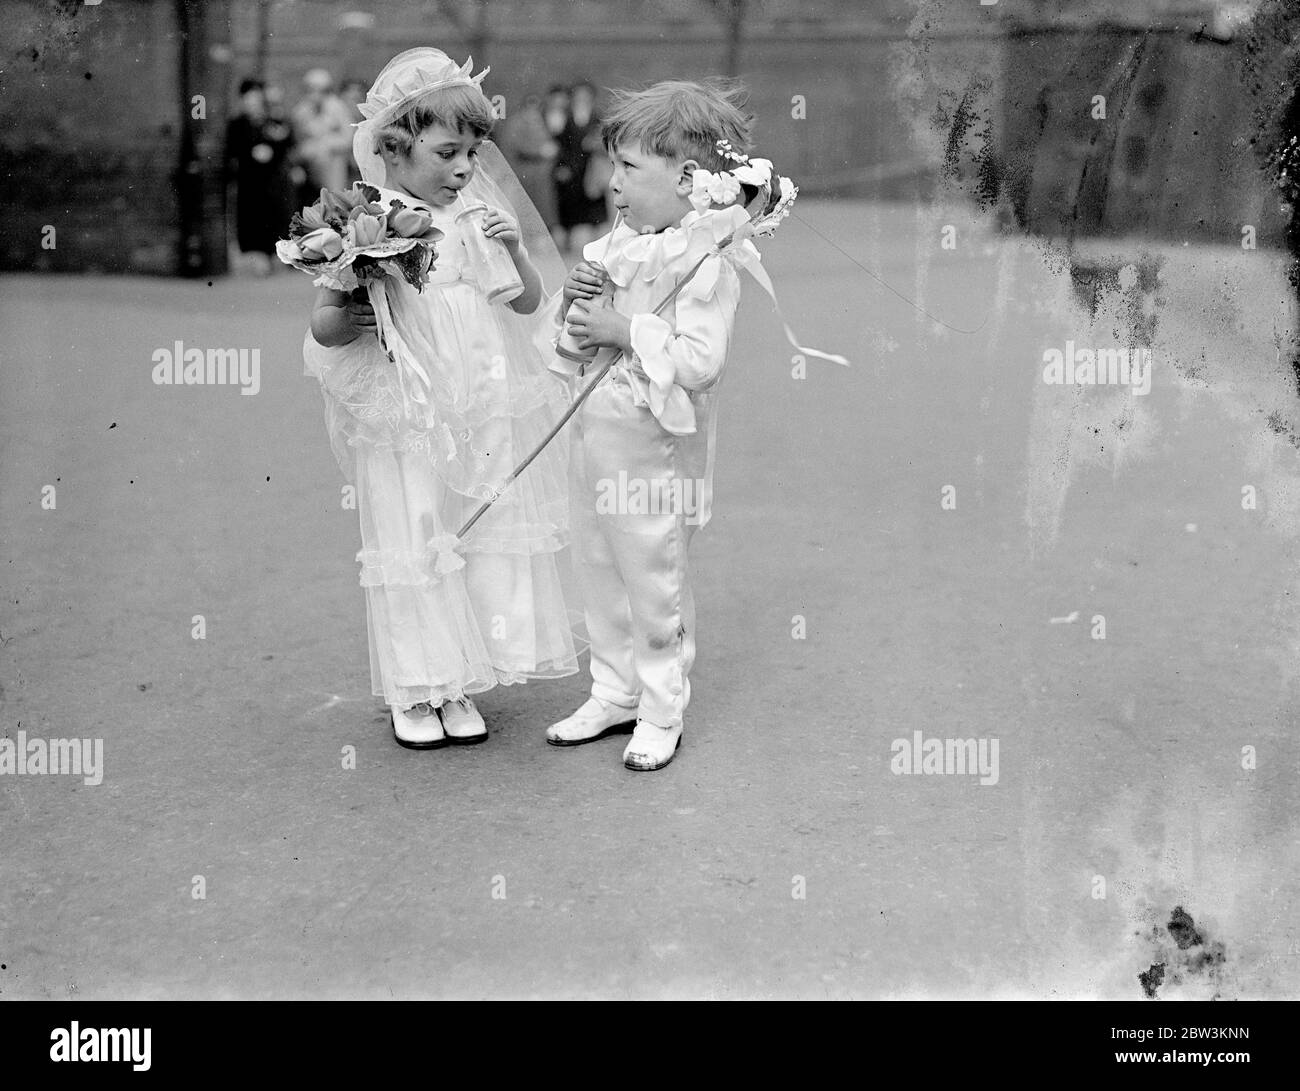 Five year old May Queen toasts May Day in milk ! . Five year old Pamela Tanner was elected one of 17 May Queens when May Day was celebrated at the Hugh Middleton School , Clerkenwell . Photo shows , Pamela Tanner , the May Queen , toasting May Day in milk with little Tony Slater , one of her attendants . 1 May 1936 Stock Photo